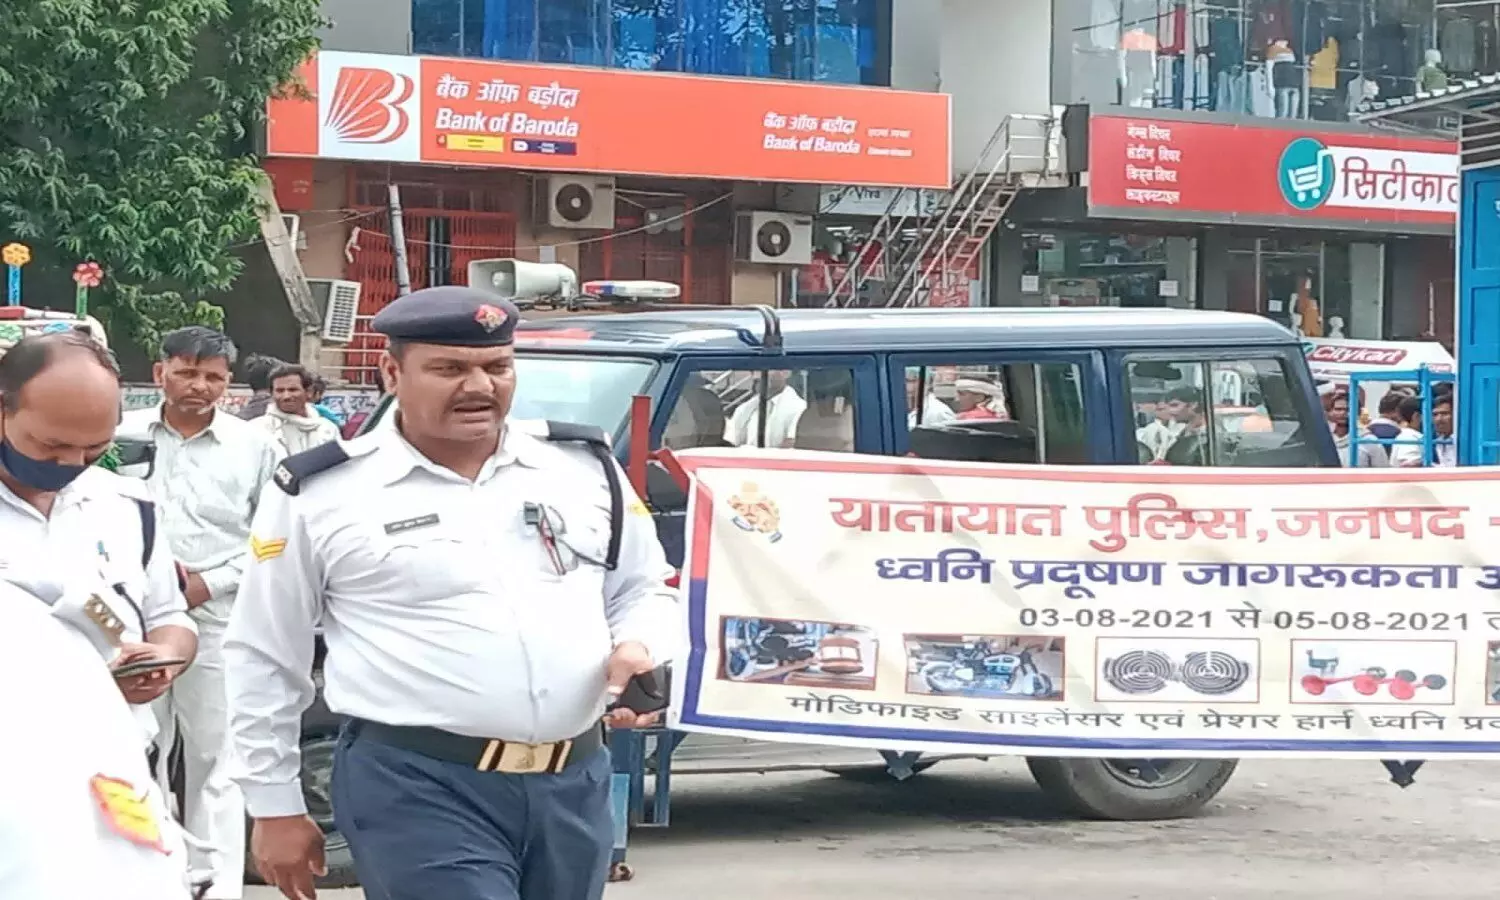 Awareness programme by police